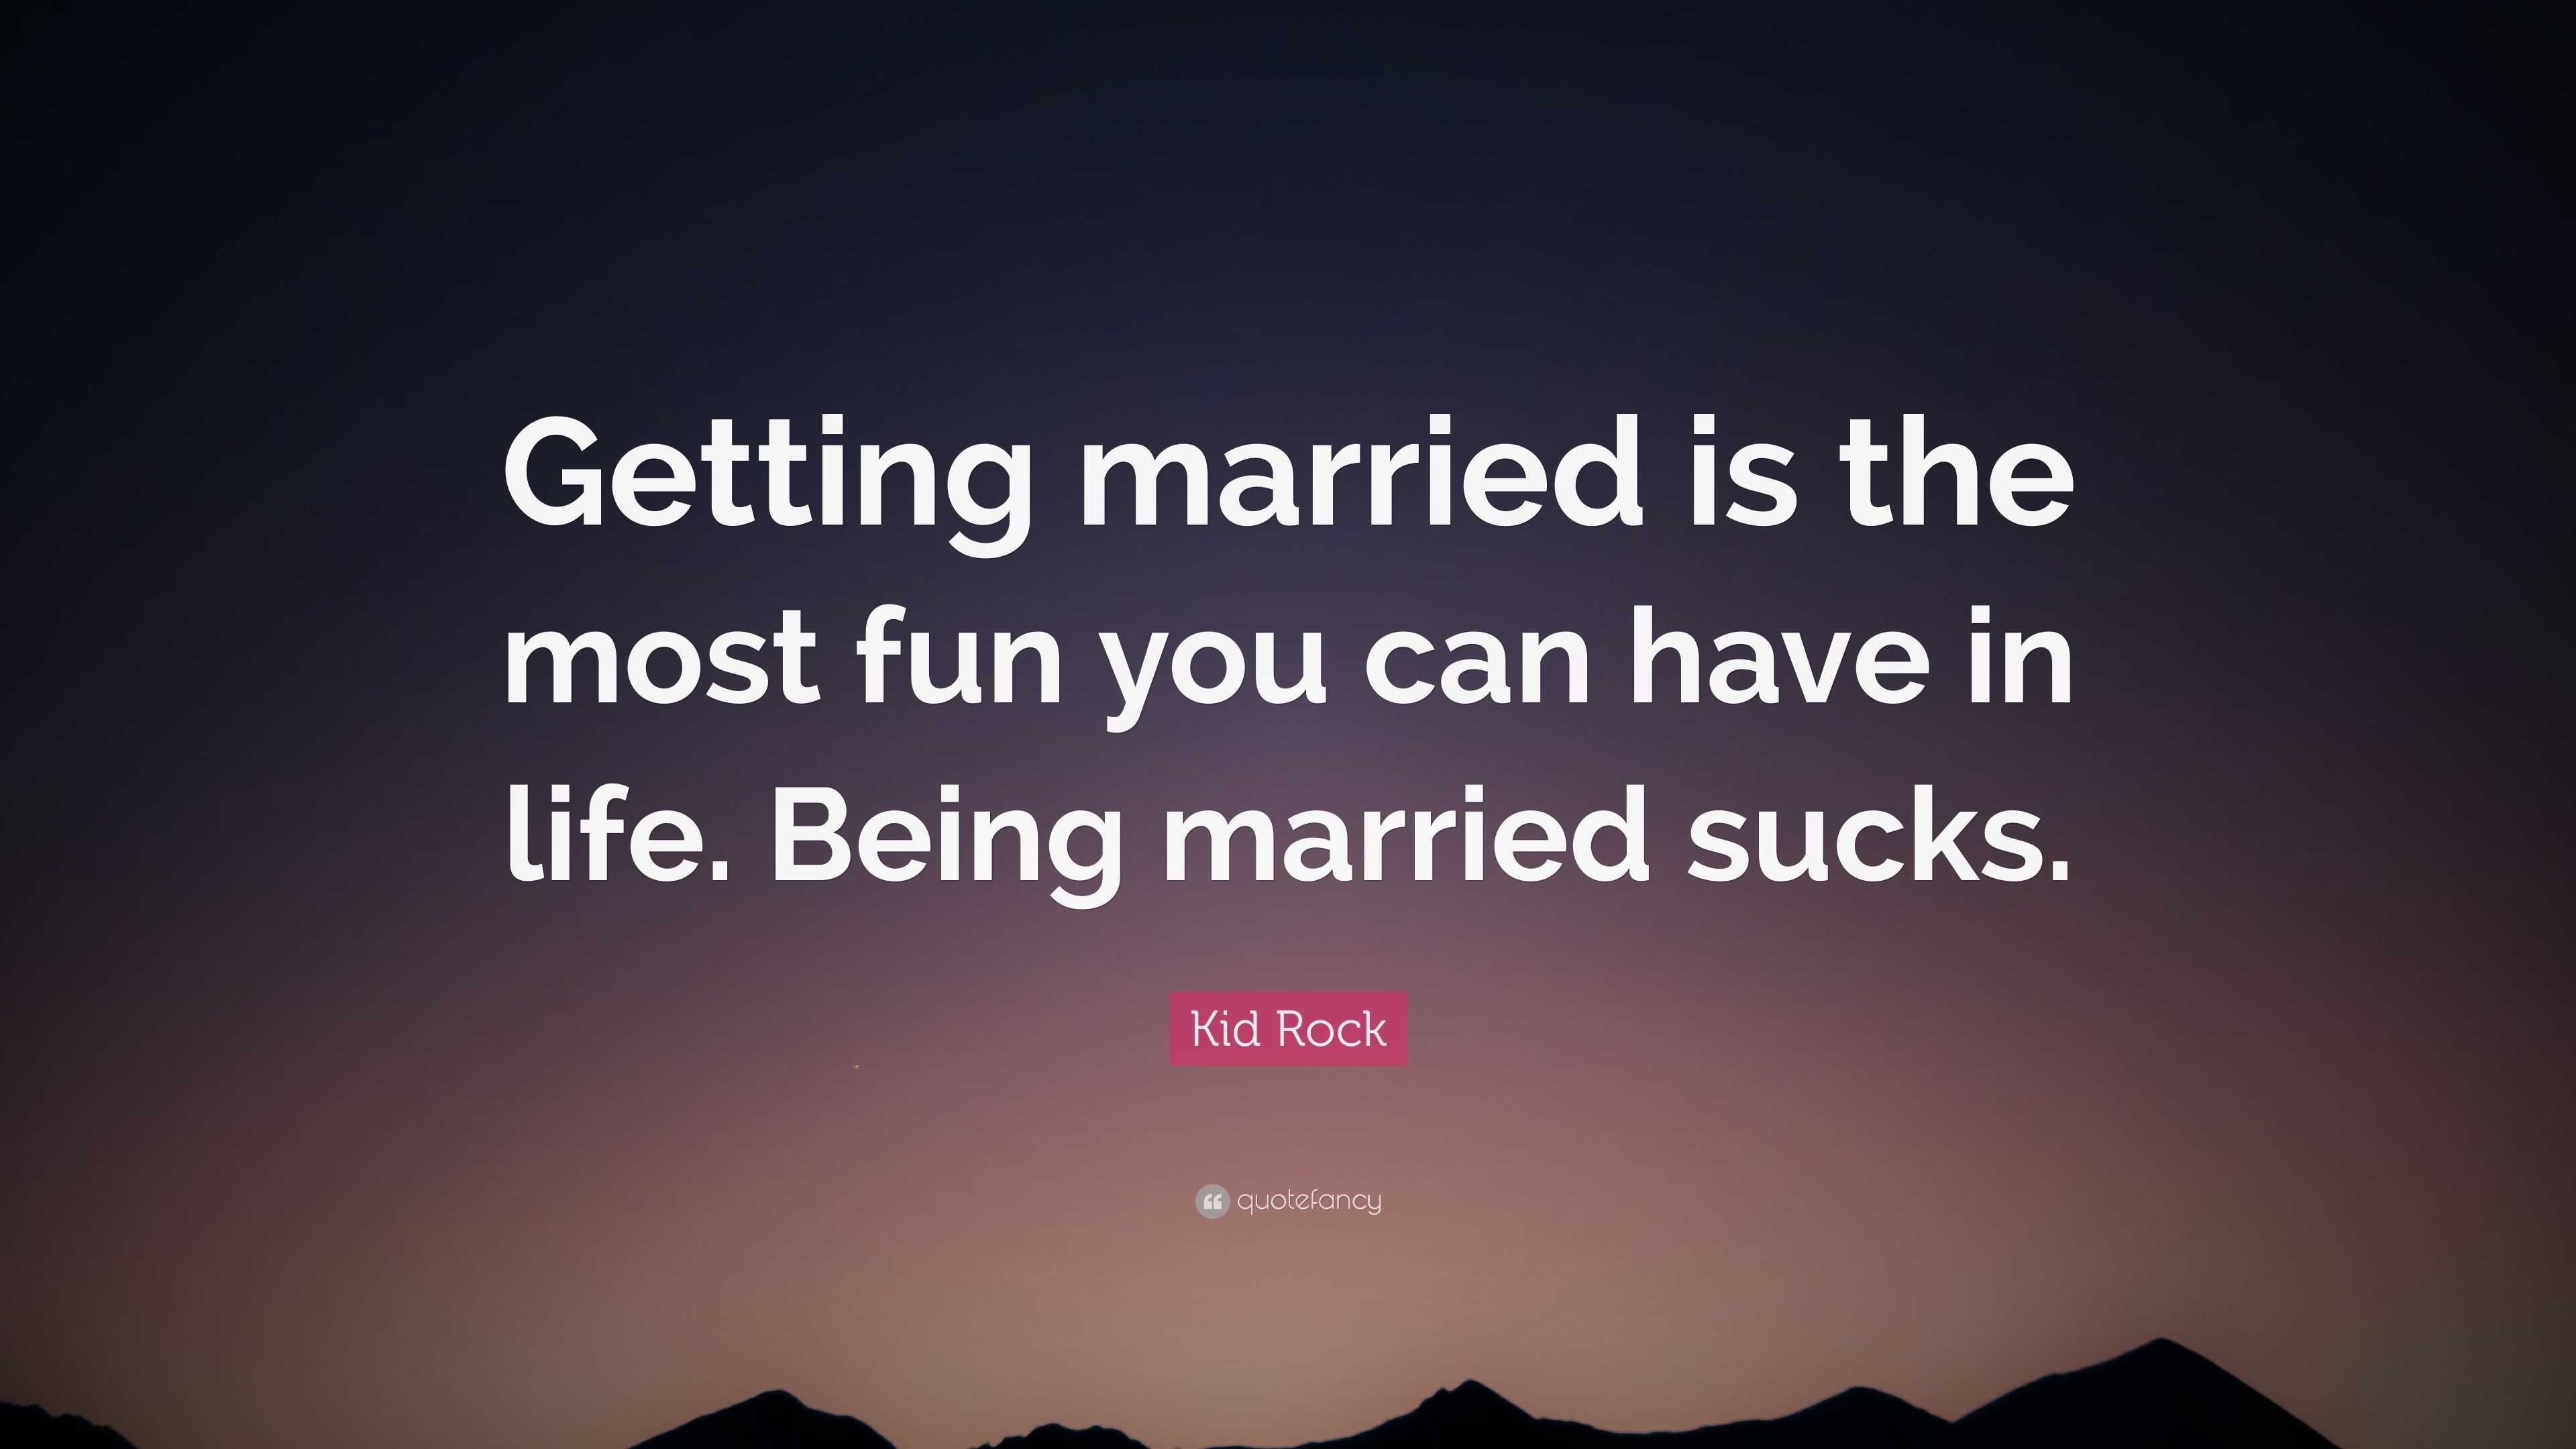 why being married sucks